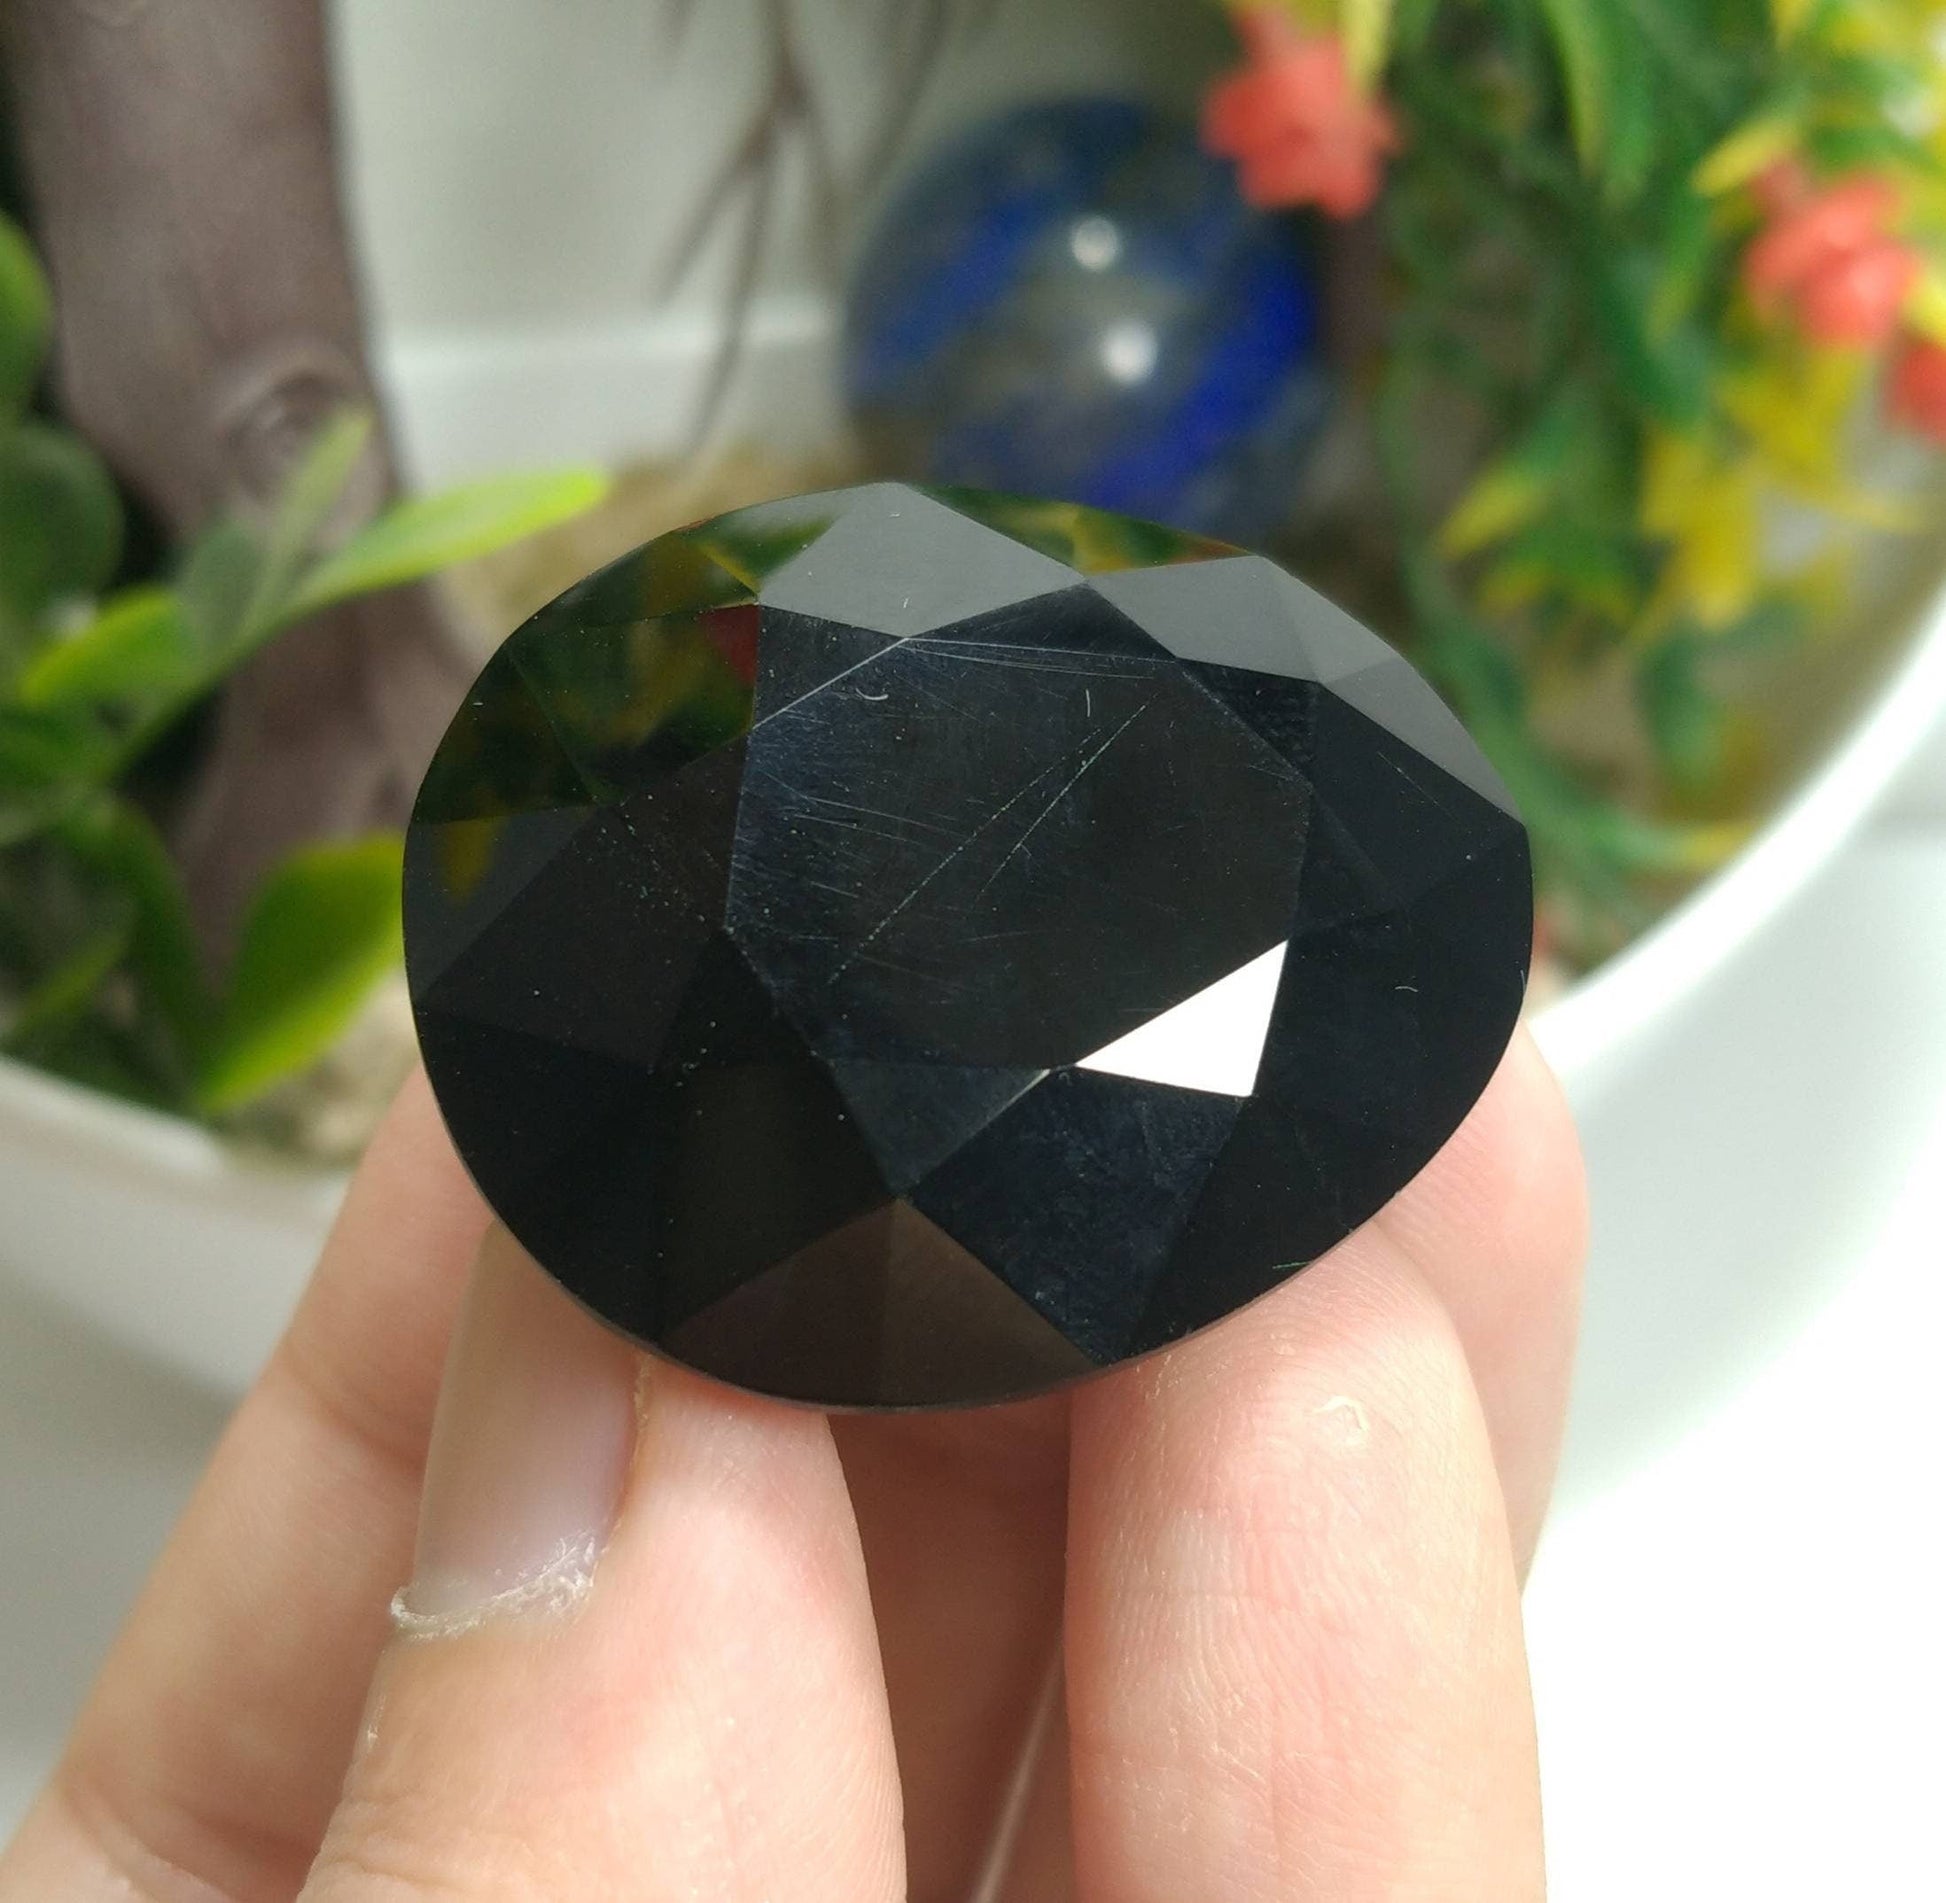 ARSAA GEMS AND MINERALSNatural fine quality beautiful 113 carats faceted pear shape smokey quartz gem - Premium  from ARSAA GEMS AND MINERALS - Just $25.00! Shop now at ARSAA GEMS AND MINERALS